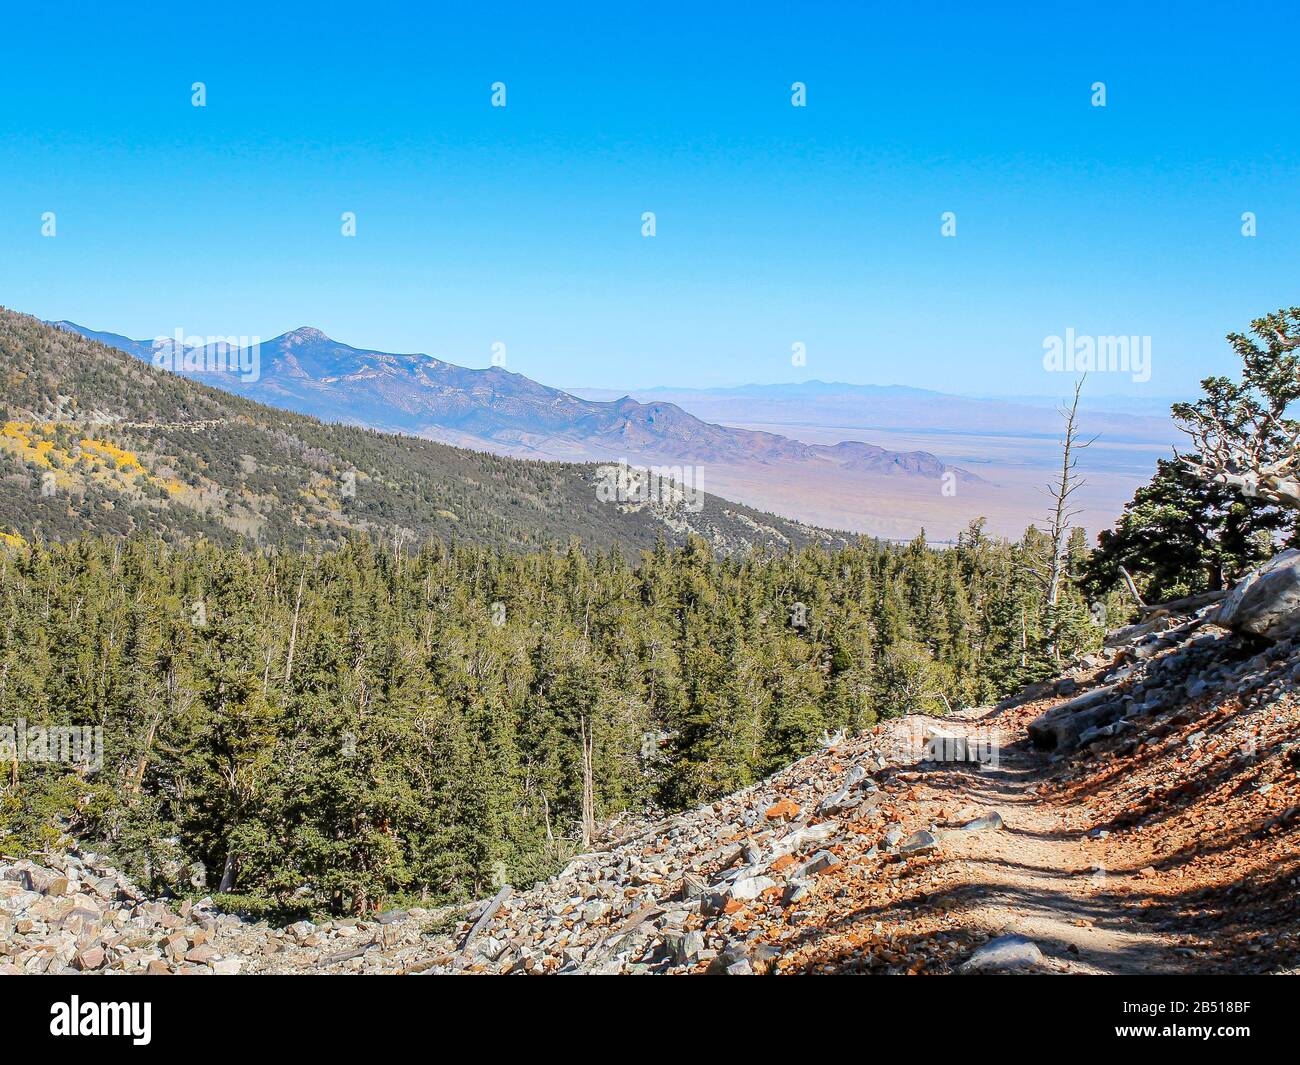 A view across Eastern Nevada from Great Basin National Park Stock Photo